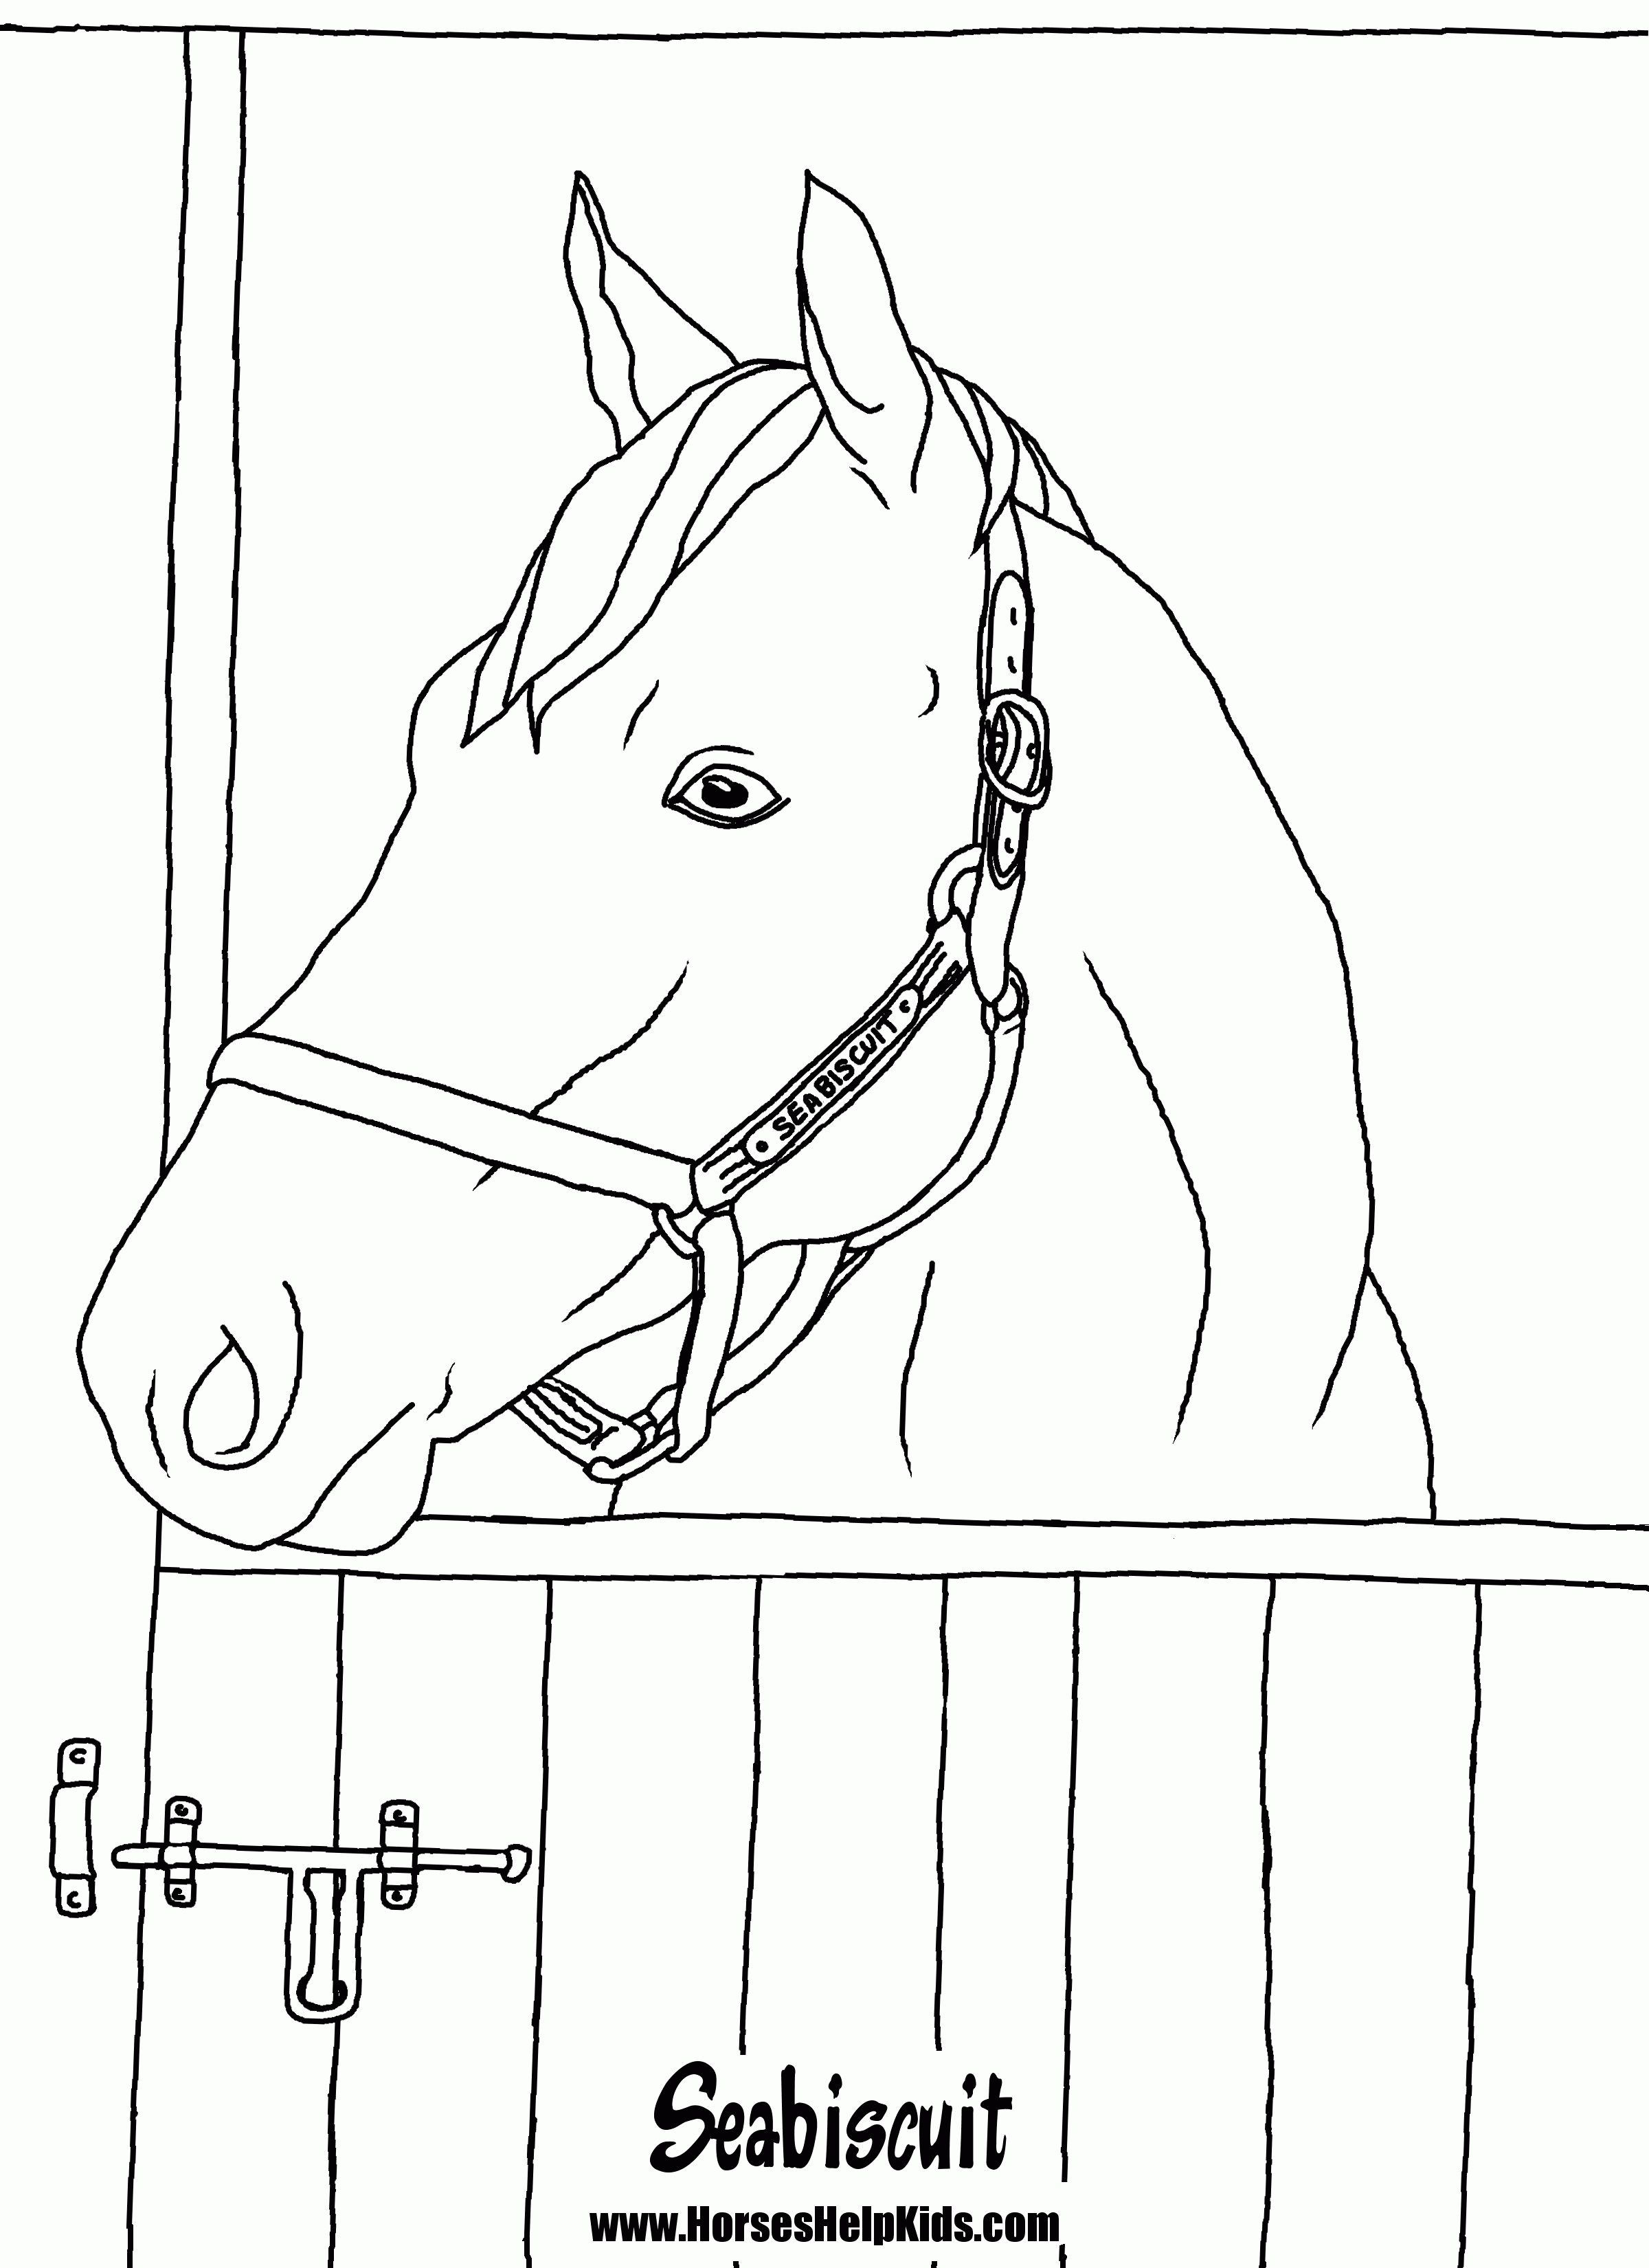 Horses Help Kids - Seabisuit Coloring Page